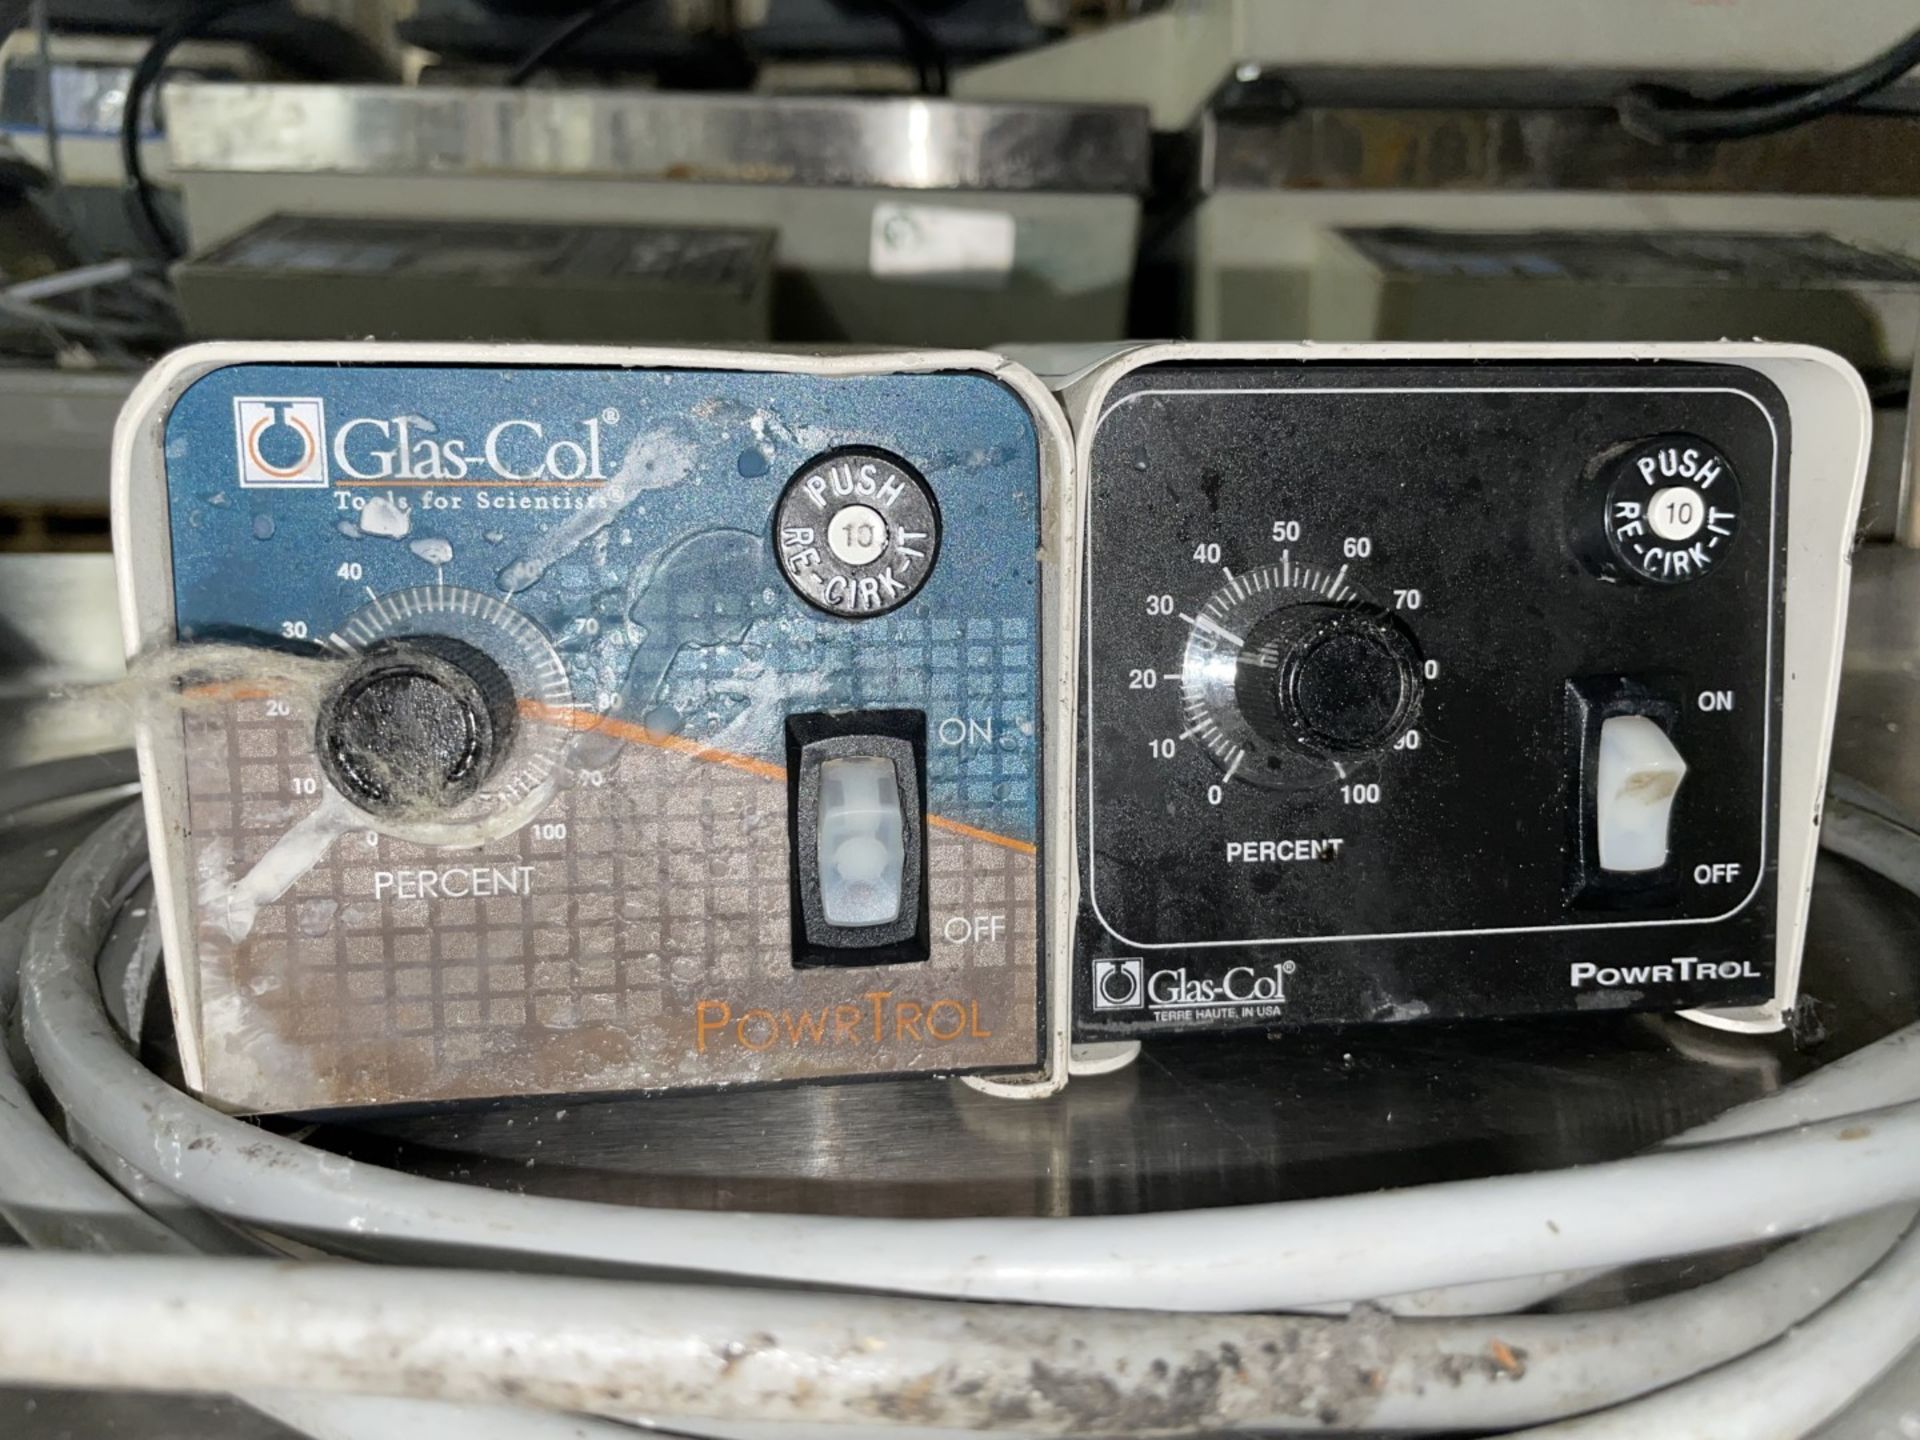 Lot of (2) Glas-Col PowrTrol Heater Controllers